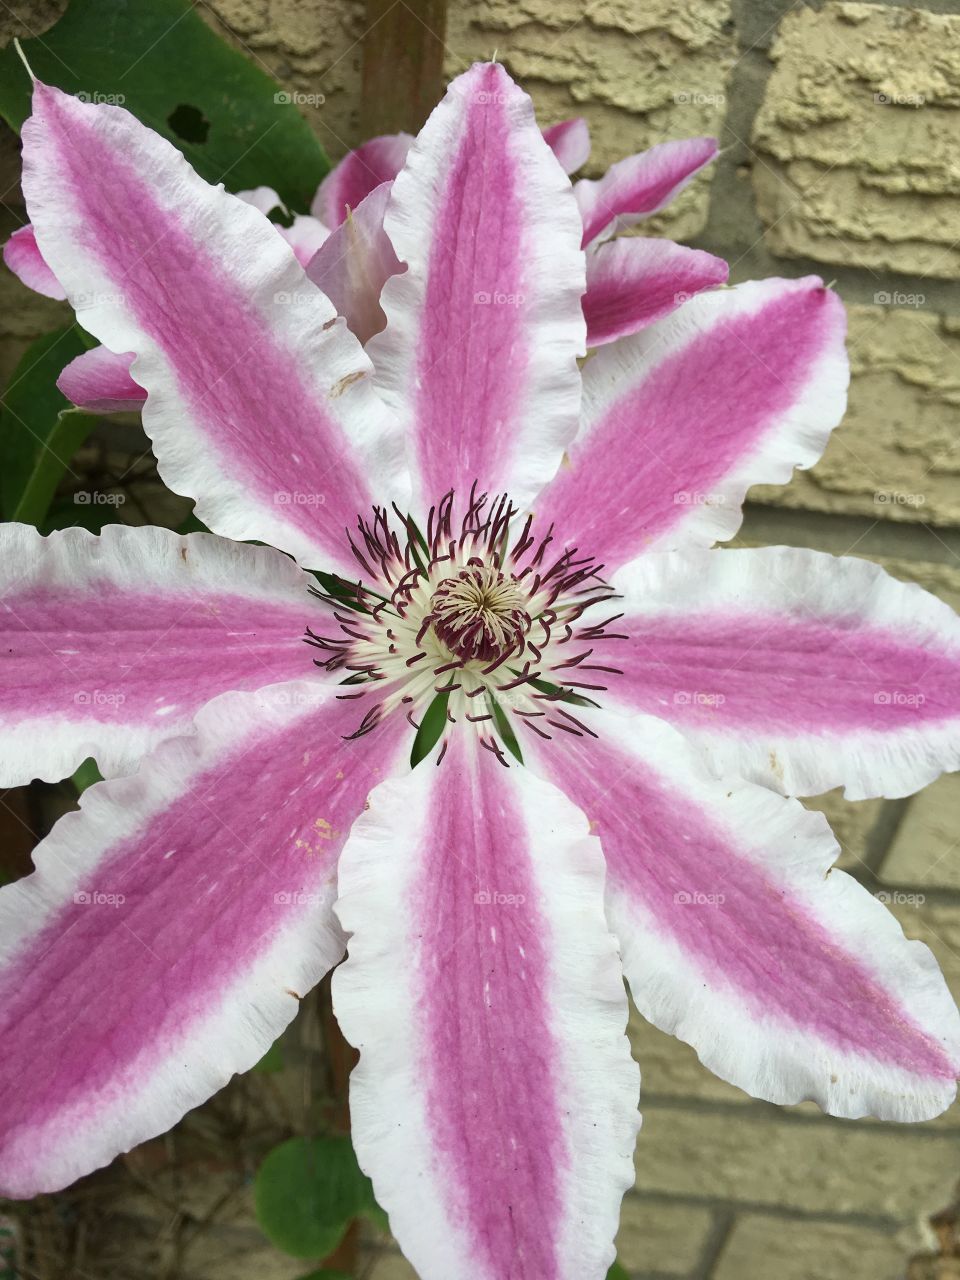 Close up view of pink and white Clematis flower as the climbing plant grows up a brick wall